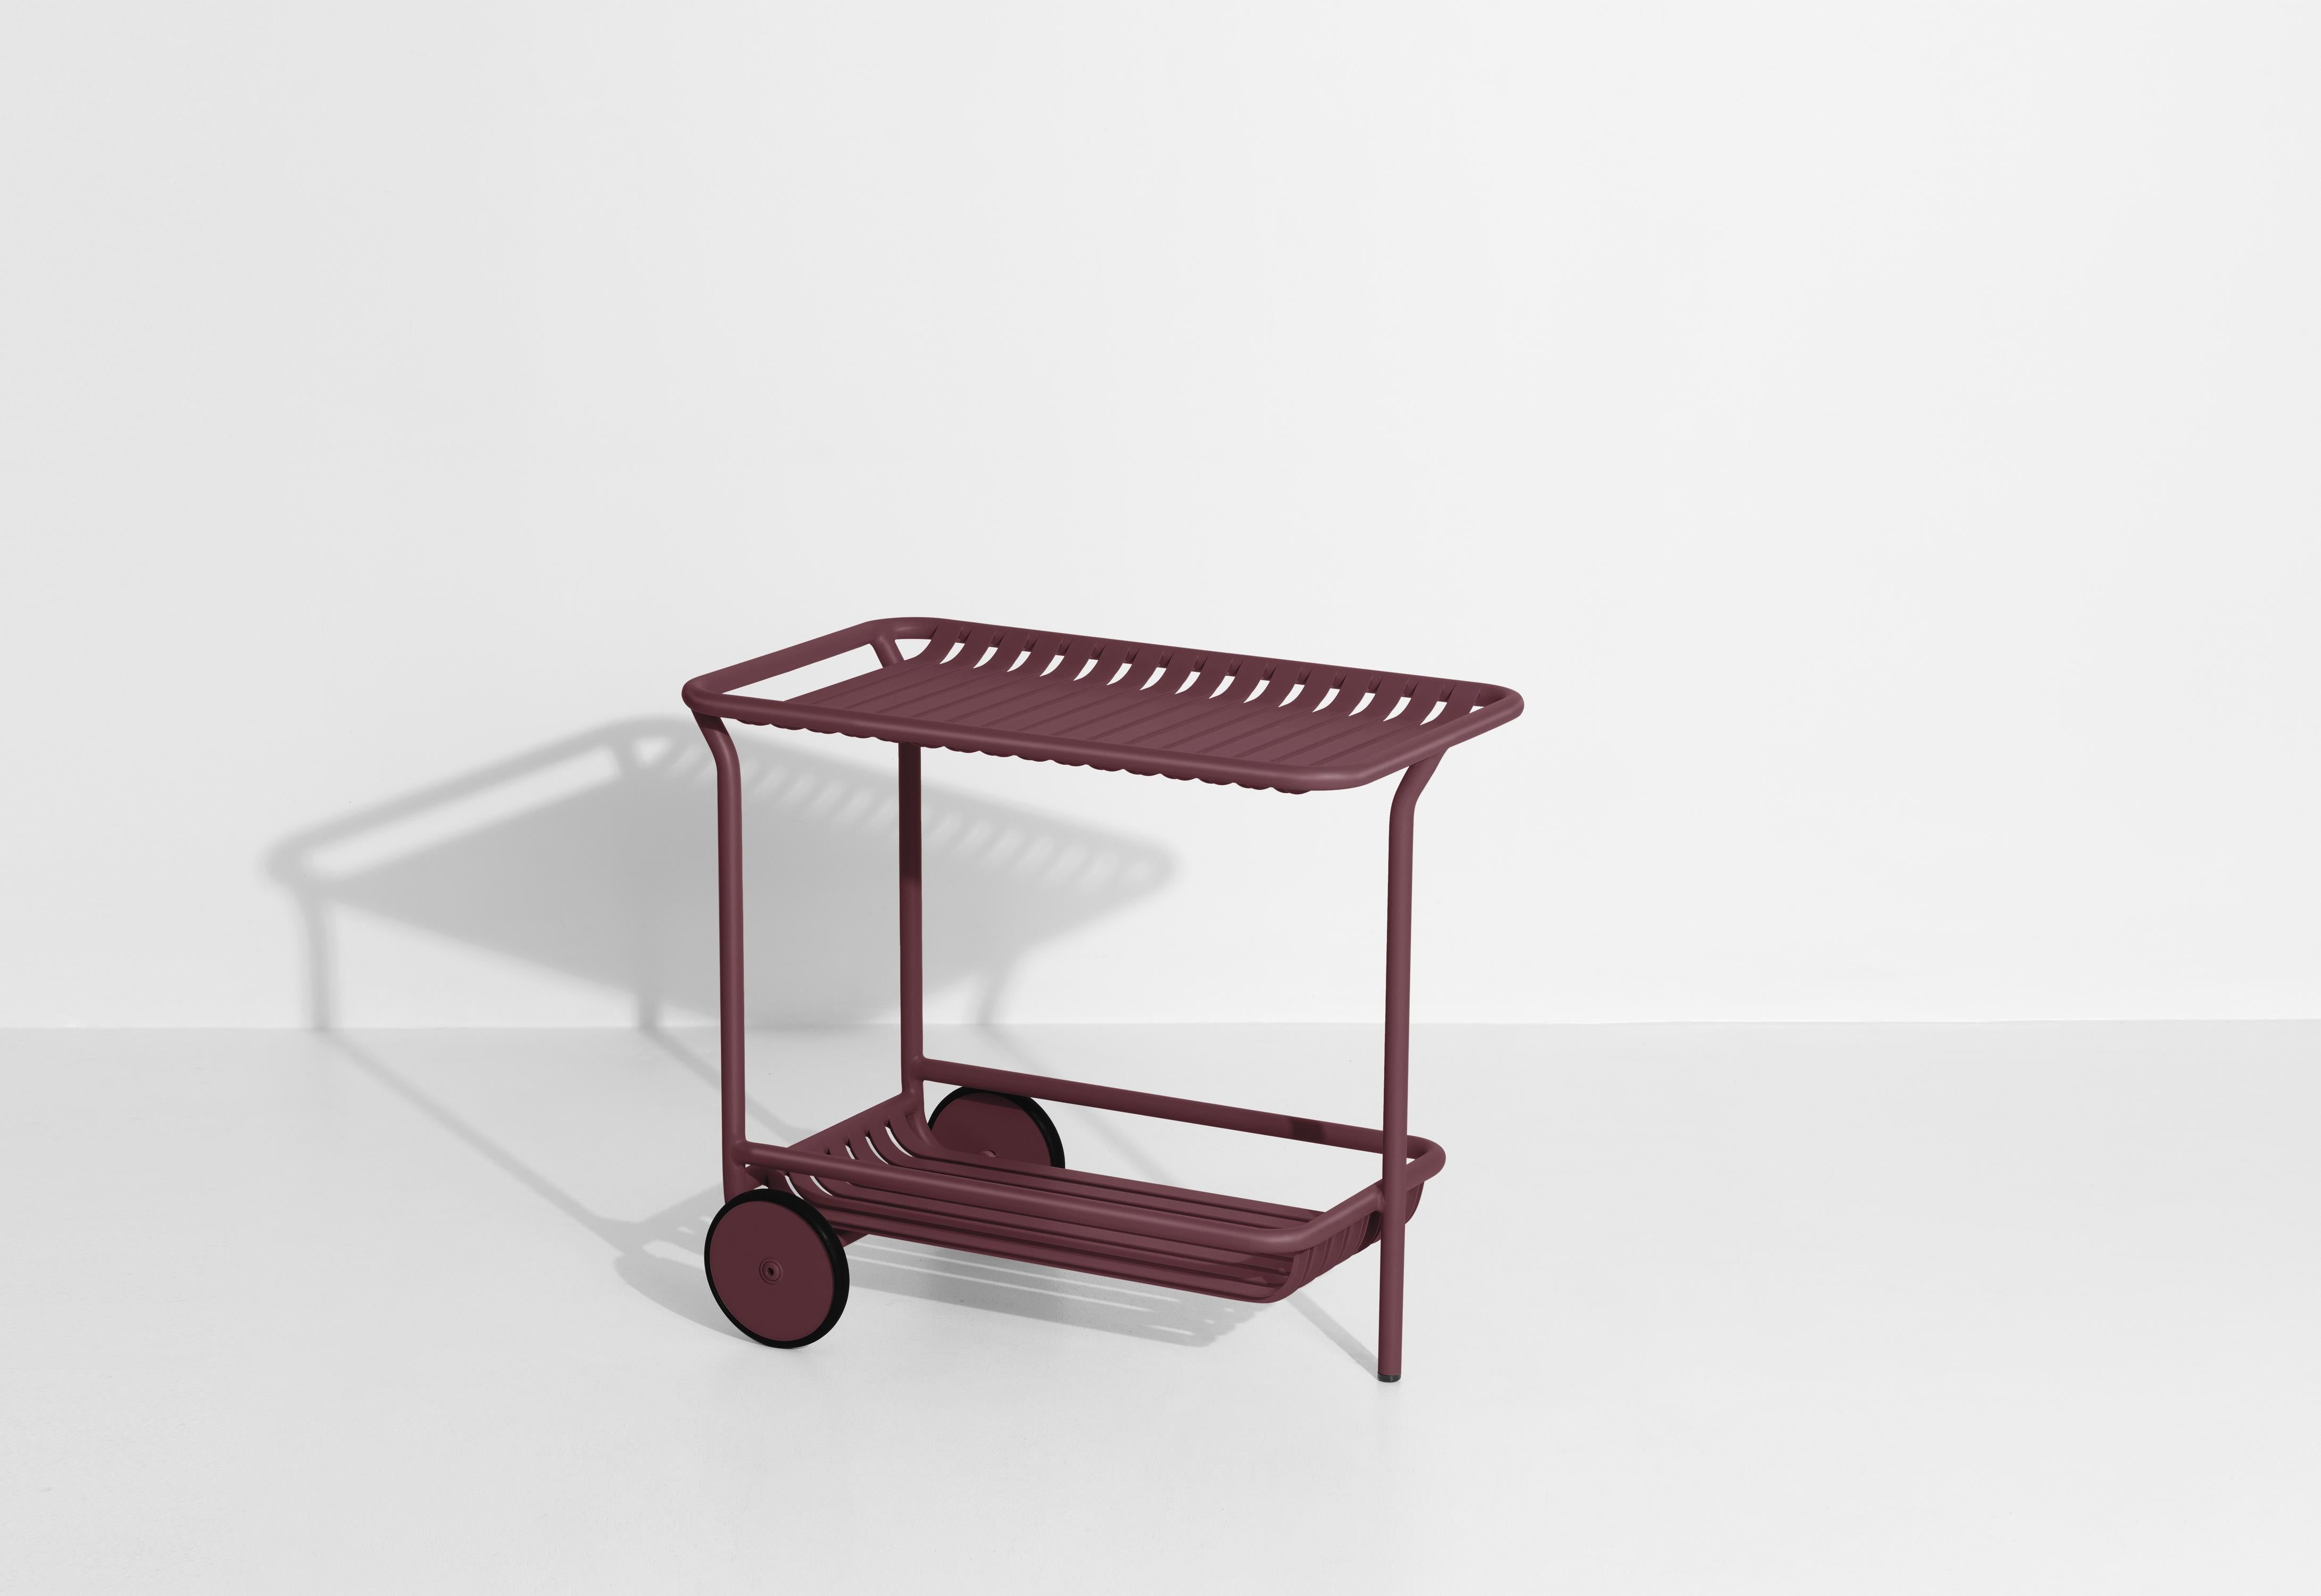 Petite Friture Week-End Trolley in Burgundy Aluminium, 2017 In New Condition For Sale In Brooklyn, NY